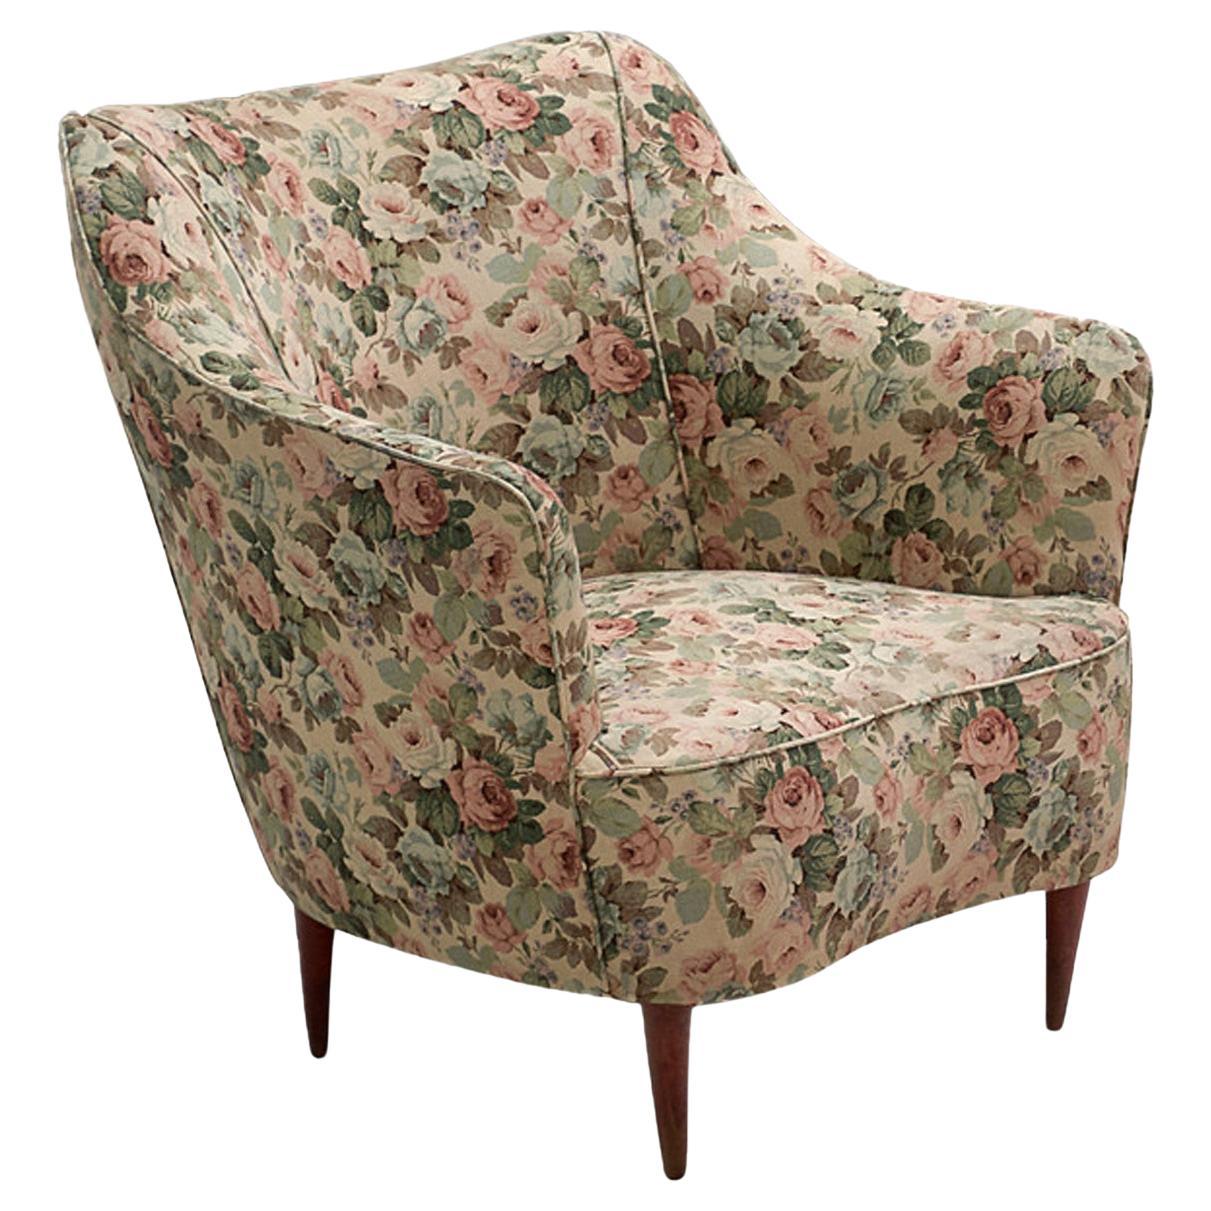 Italian Club Chair with Floral Upholstery For Sale